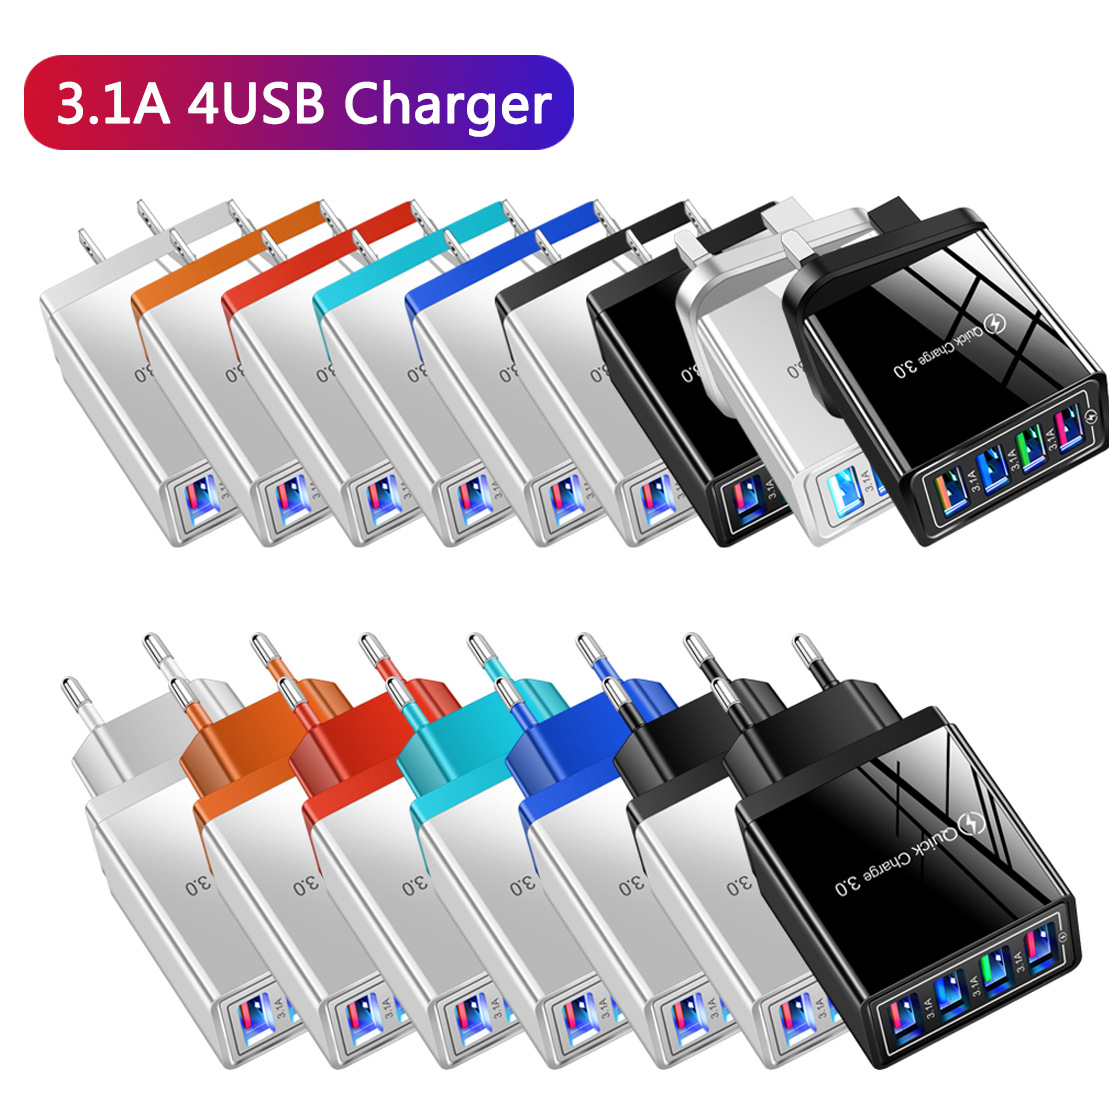 430-A USB Charger Cube, Wall Charger Plug, 3.1A 4-Multi Port USB Adapter Power Plug Charging Station Box Base Replacement